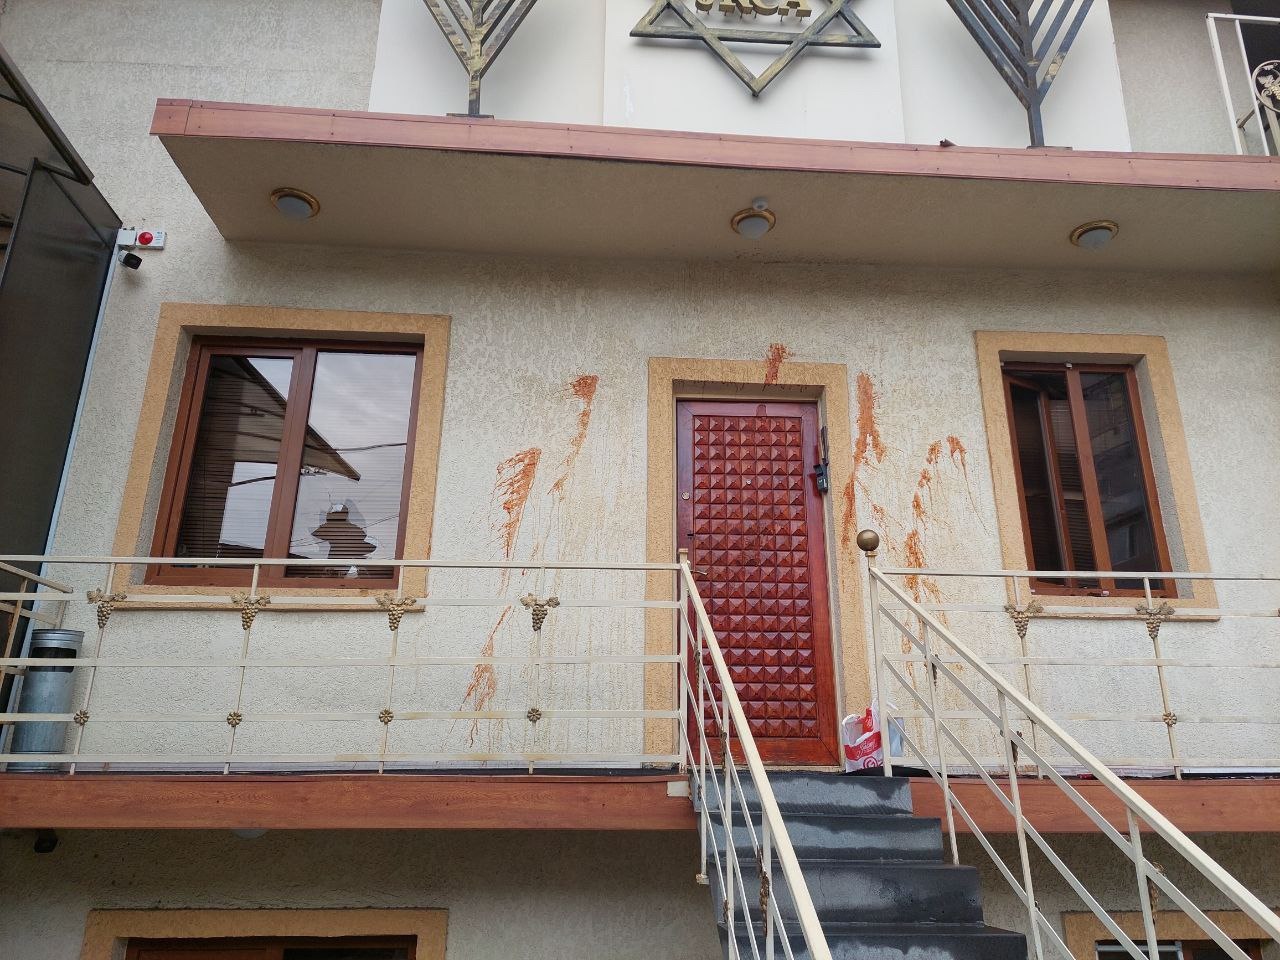 Synagogue vandalized in Armenia, apparently over Israeli-Azeri ties | The Times of Israel